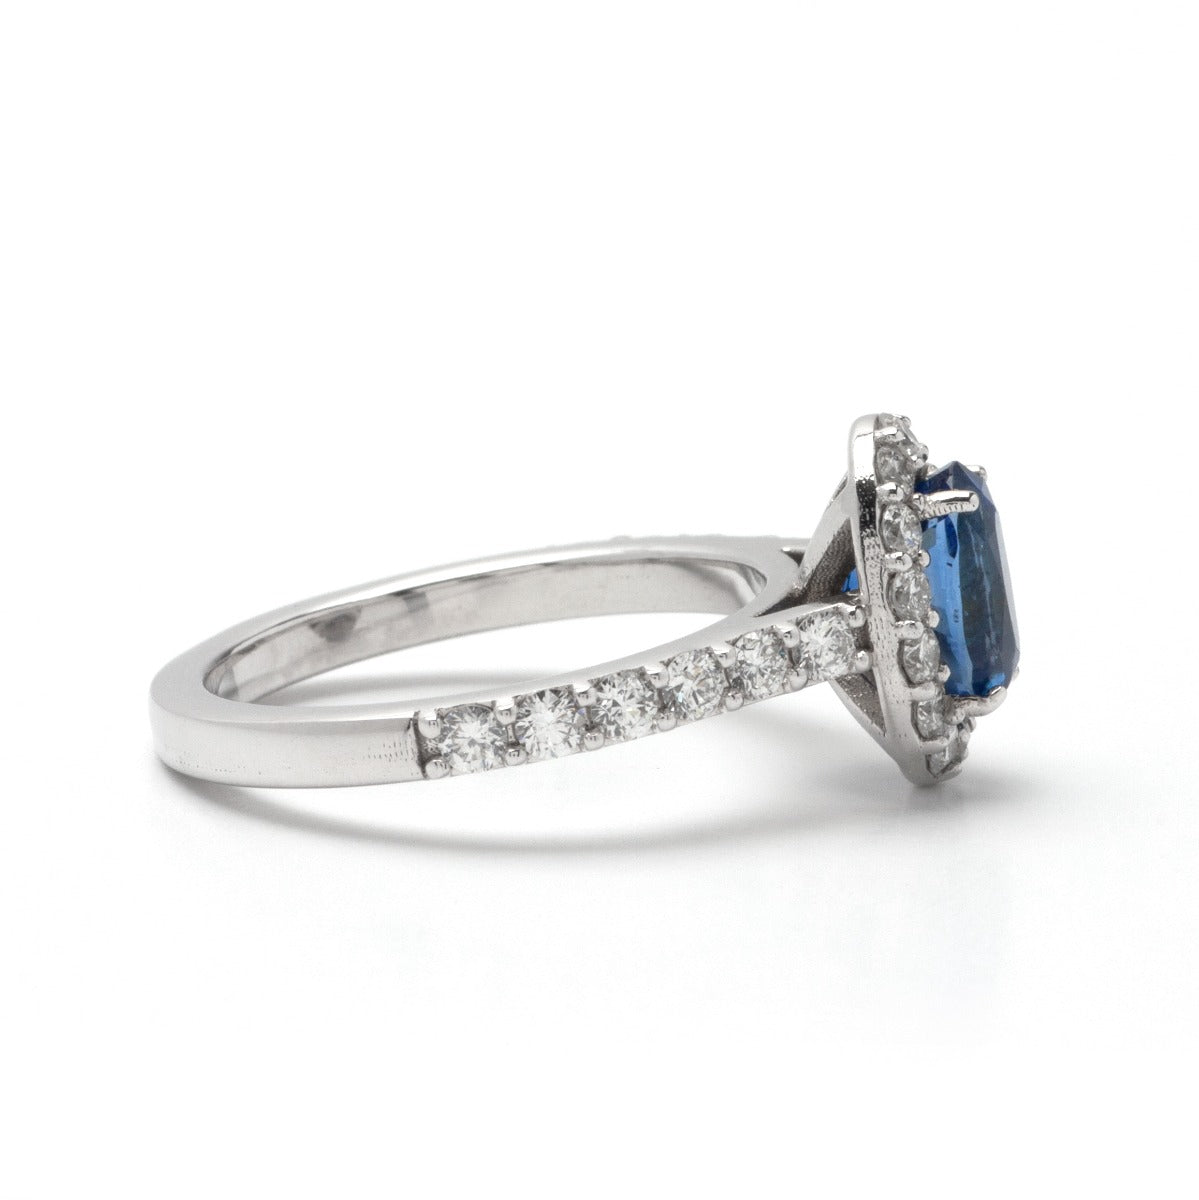 Sapphire Oval Halo Ring in Platinum; 1.94 CTW